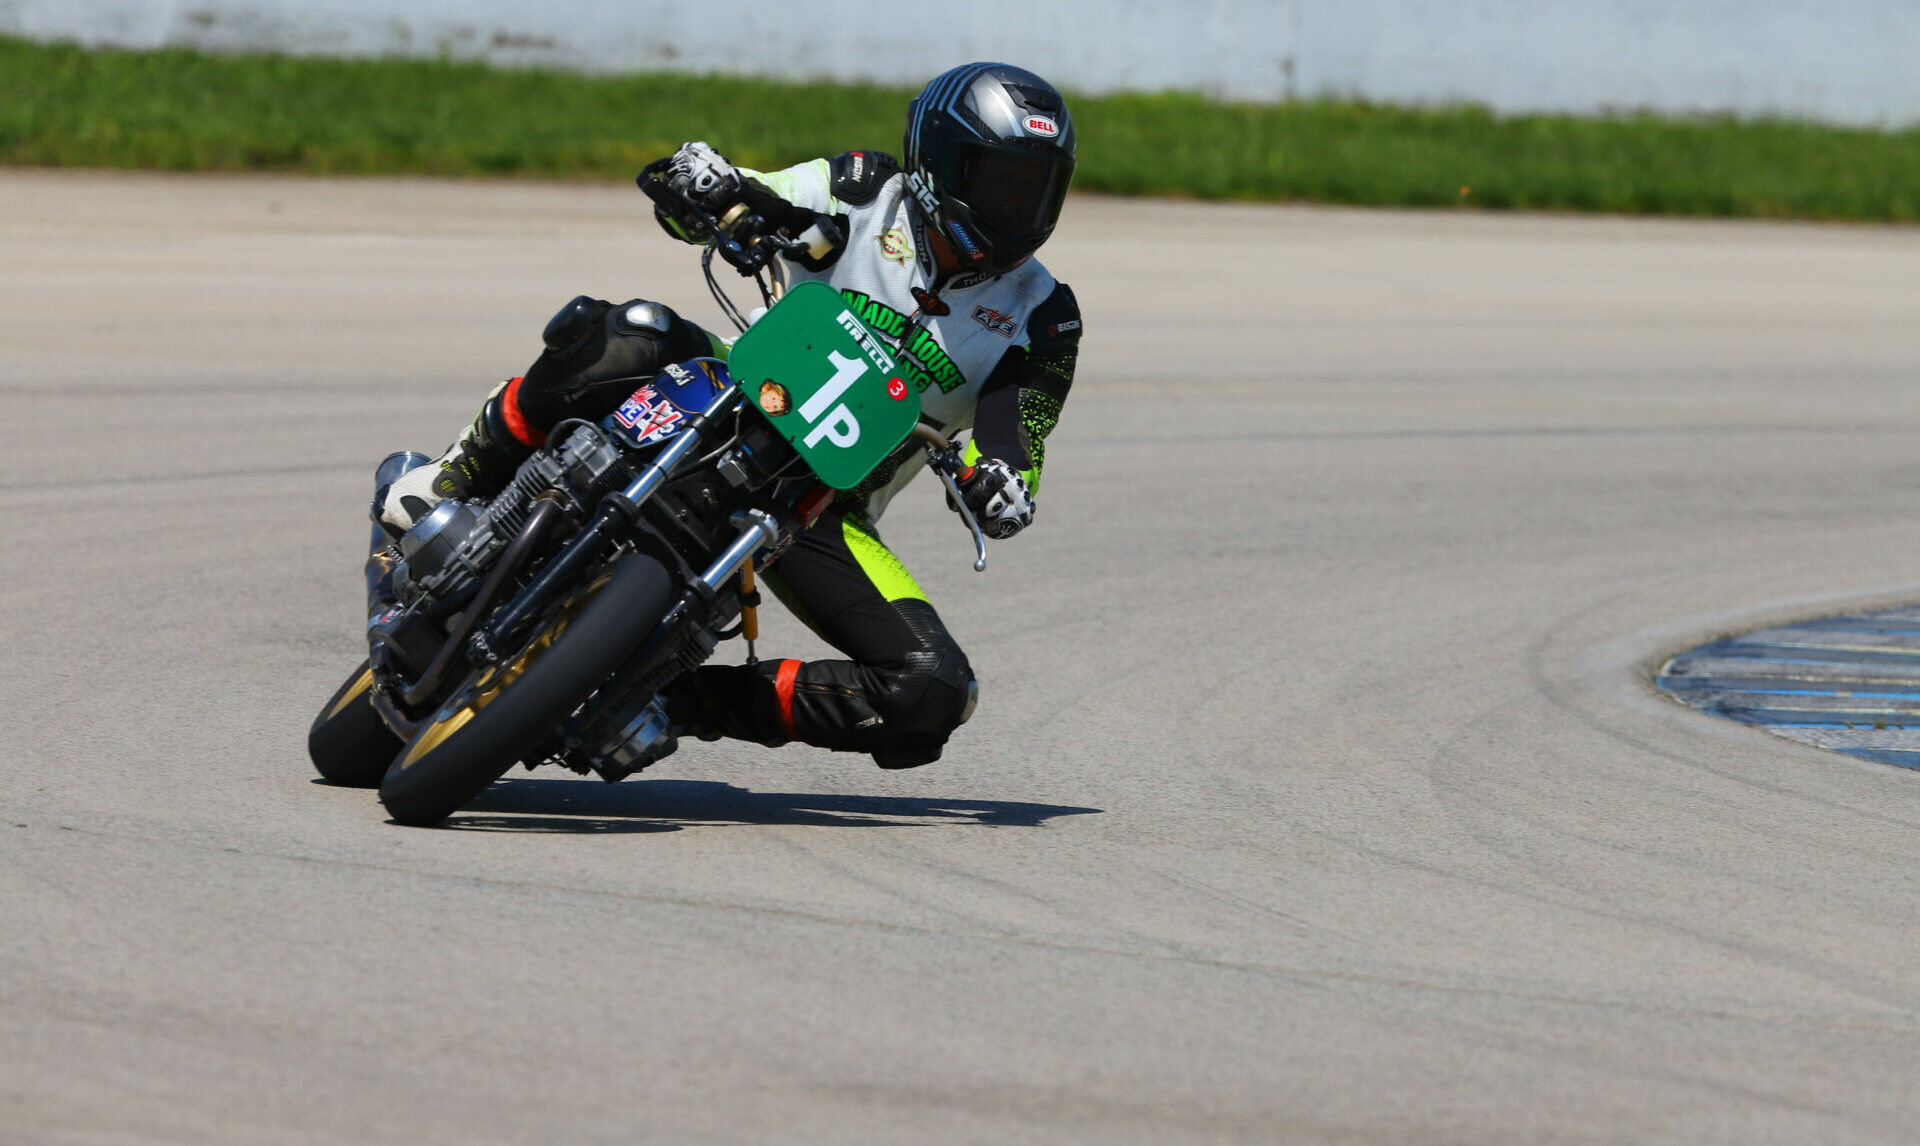 Jeremey Maddrill (1p) en route to one of his AHRMA Vintage Cup victories during the AHRMA Classic MotoFest in the Heartland at Heartland Motorsports Park. Photo by etechphoto.com, courtesy AHRMA.